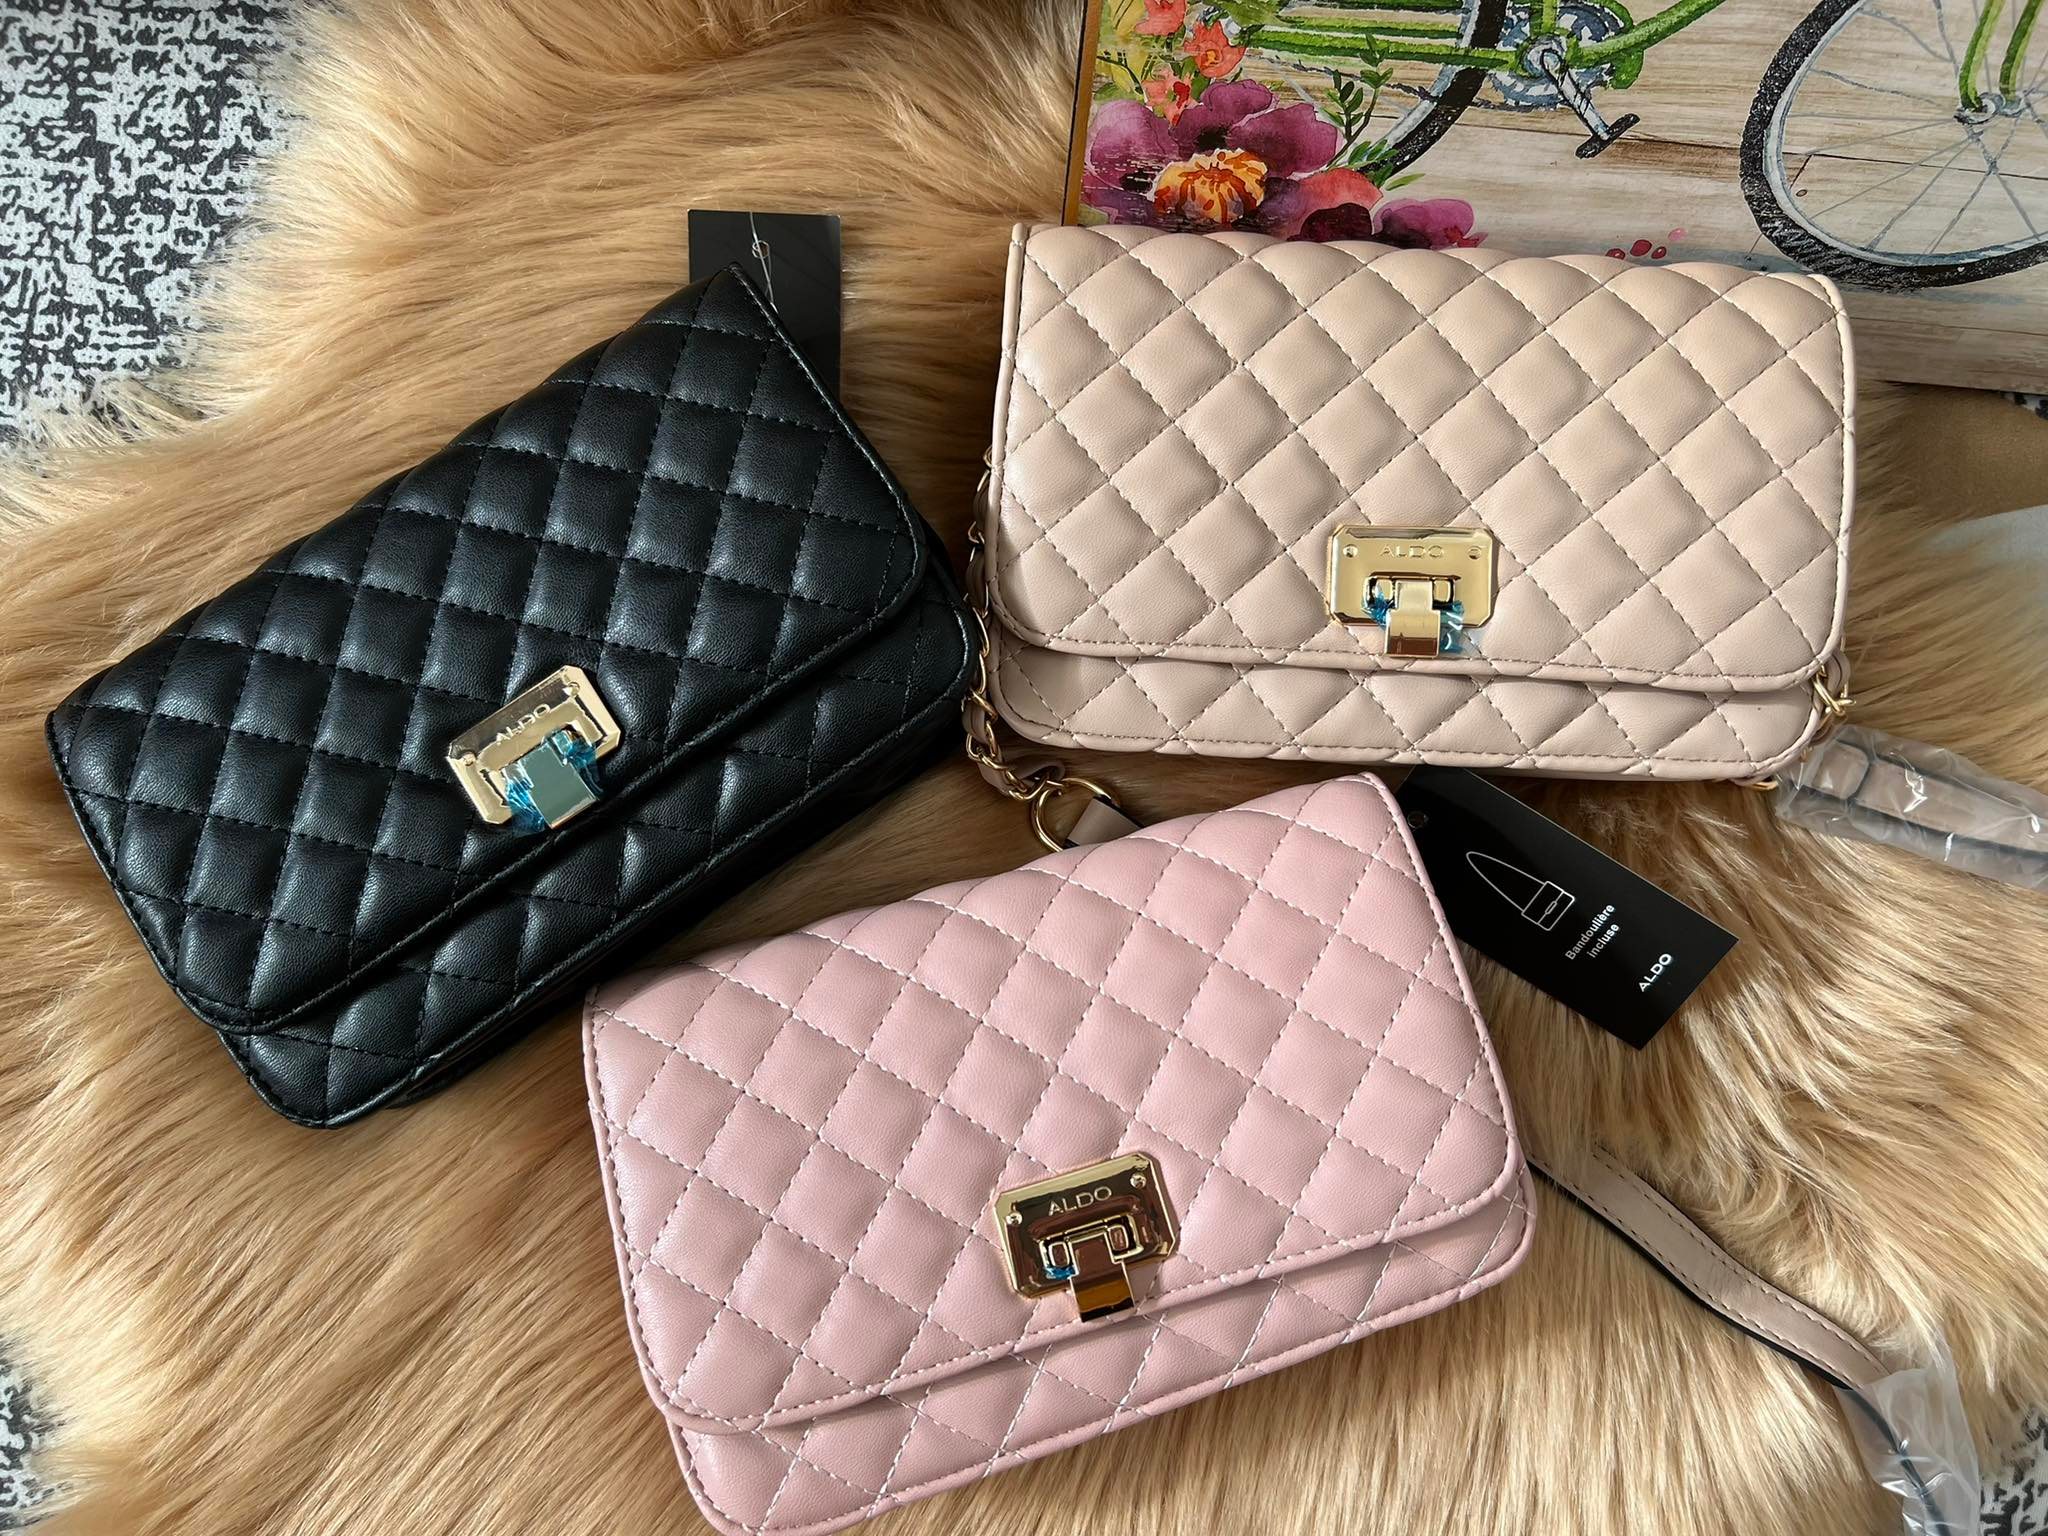 ALDO Shoes - Malaysia - We almost can't stop looking at this luxurious  quilted bag. Add charm and fun to your outfit with our new Acaresa  crossbody bag. Shop here: www.aldoshoes.com.my/myacaresa #AldoMalaysia #